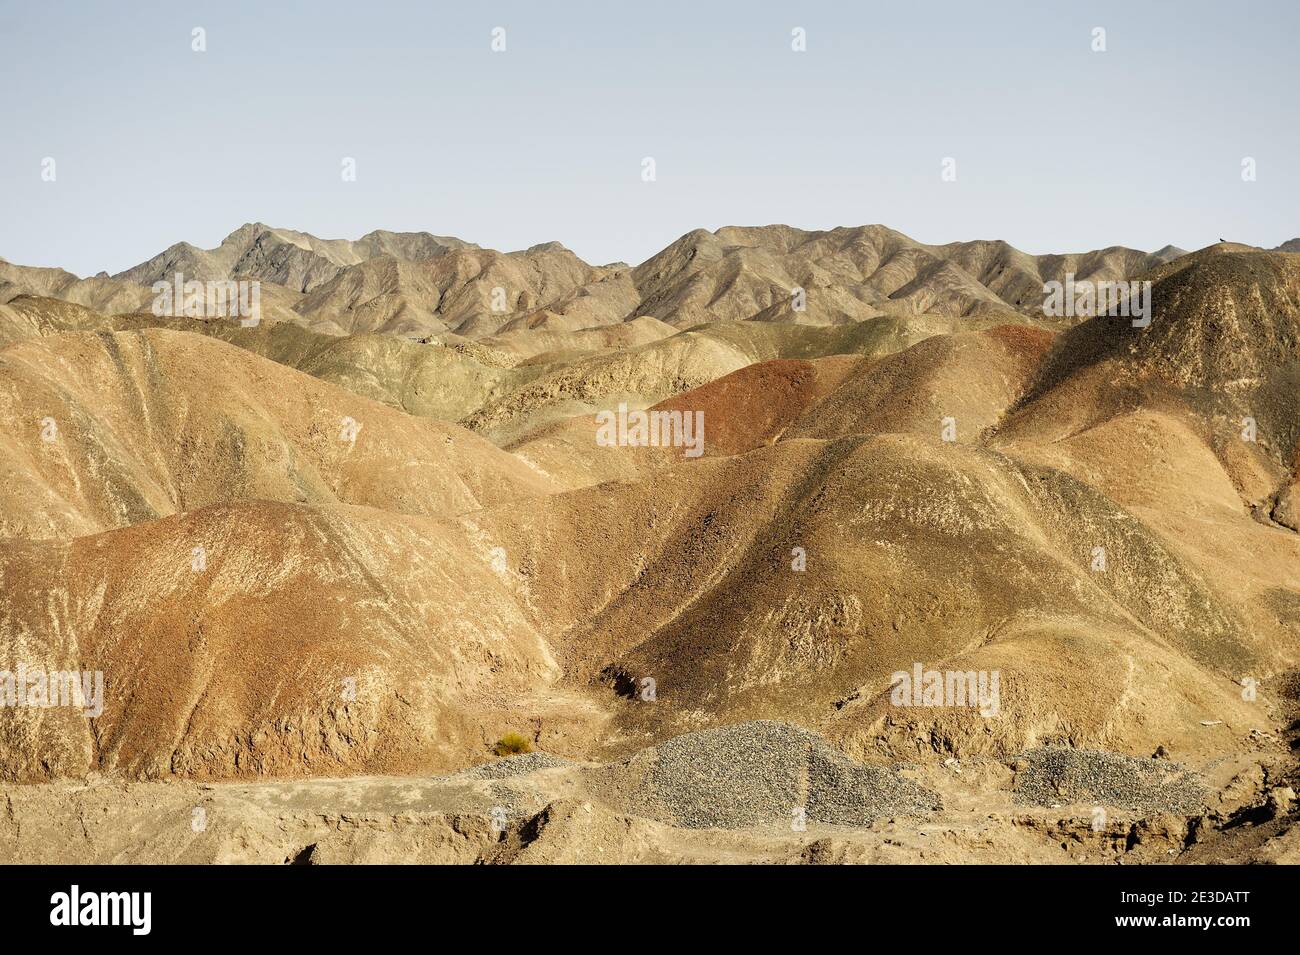 Hills in northern area of Xinjiang province Stock Photo